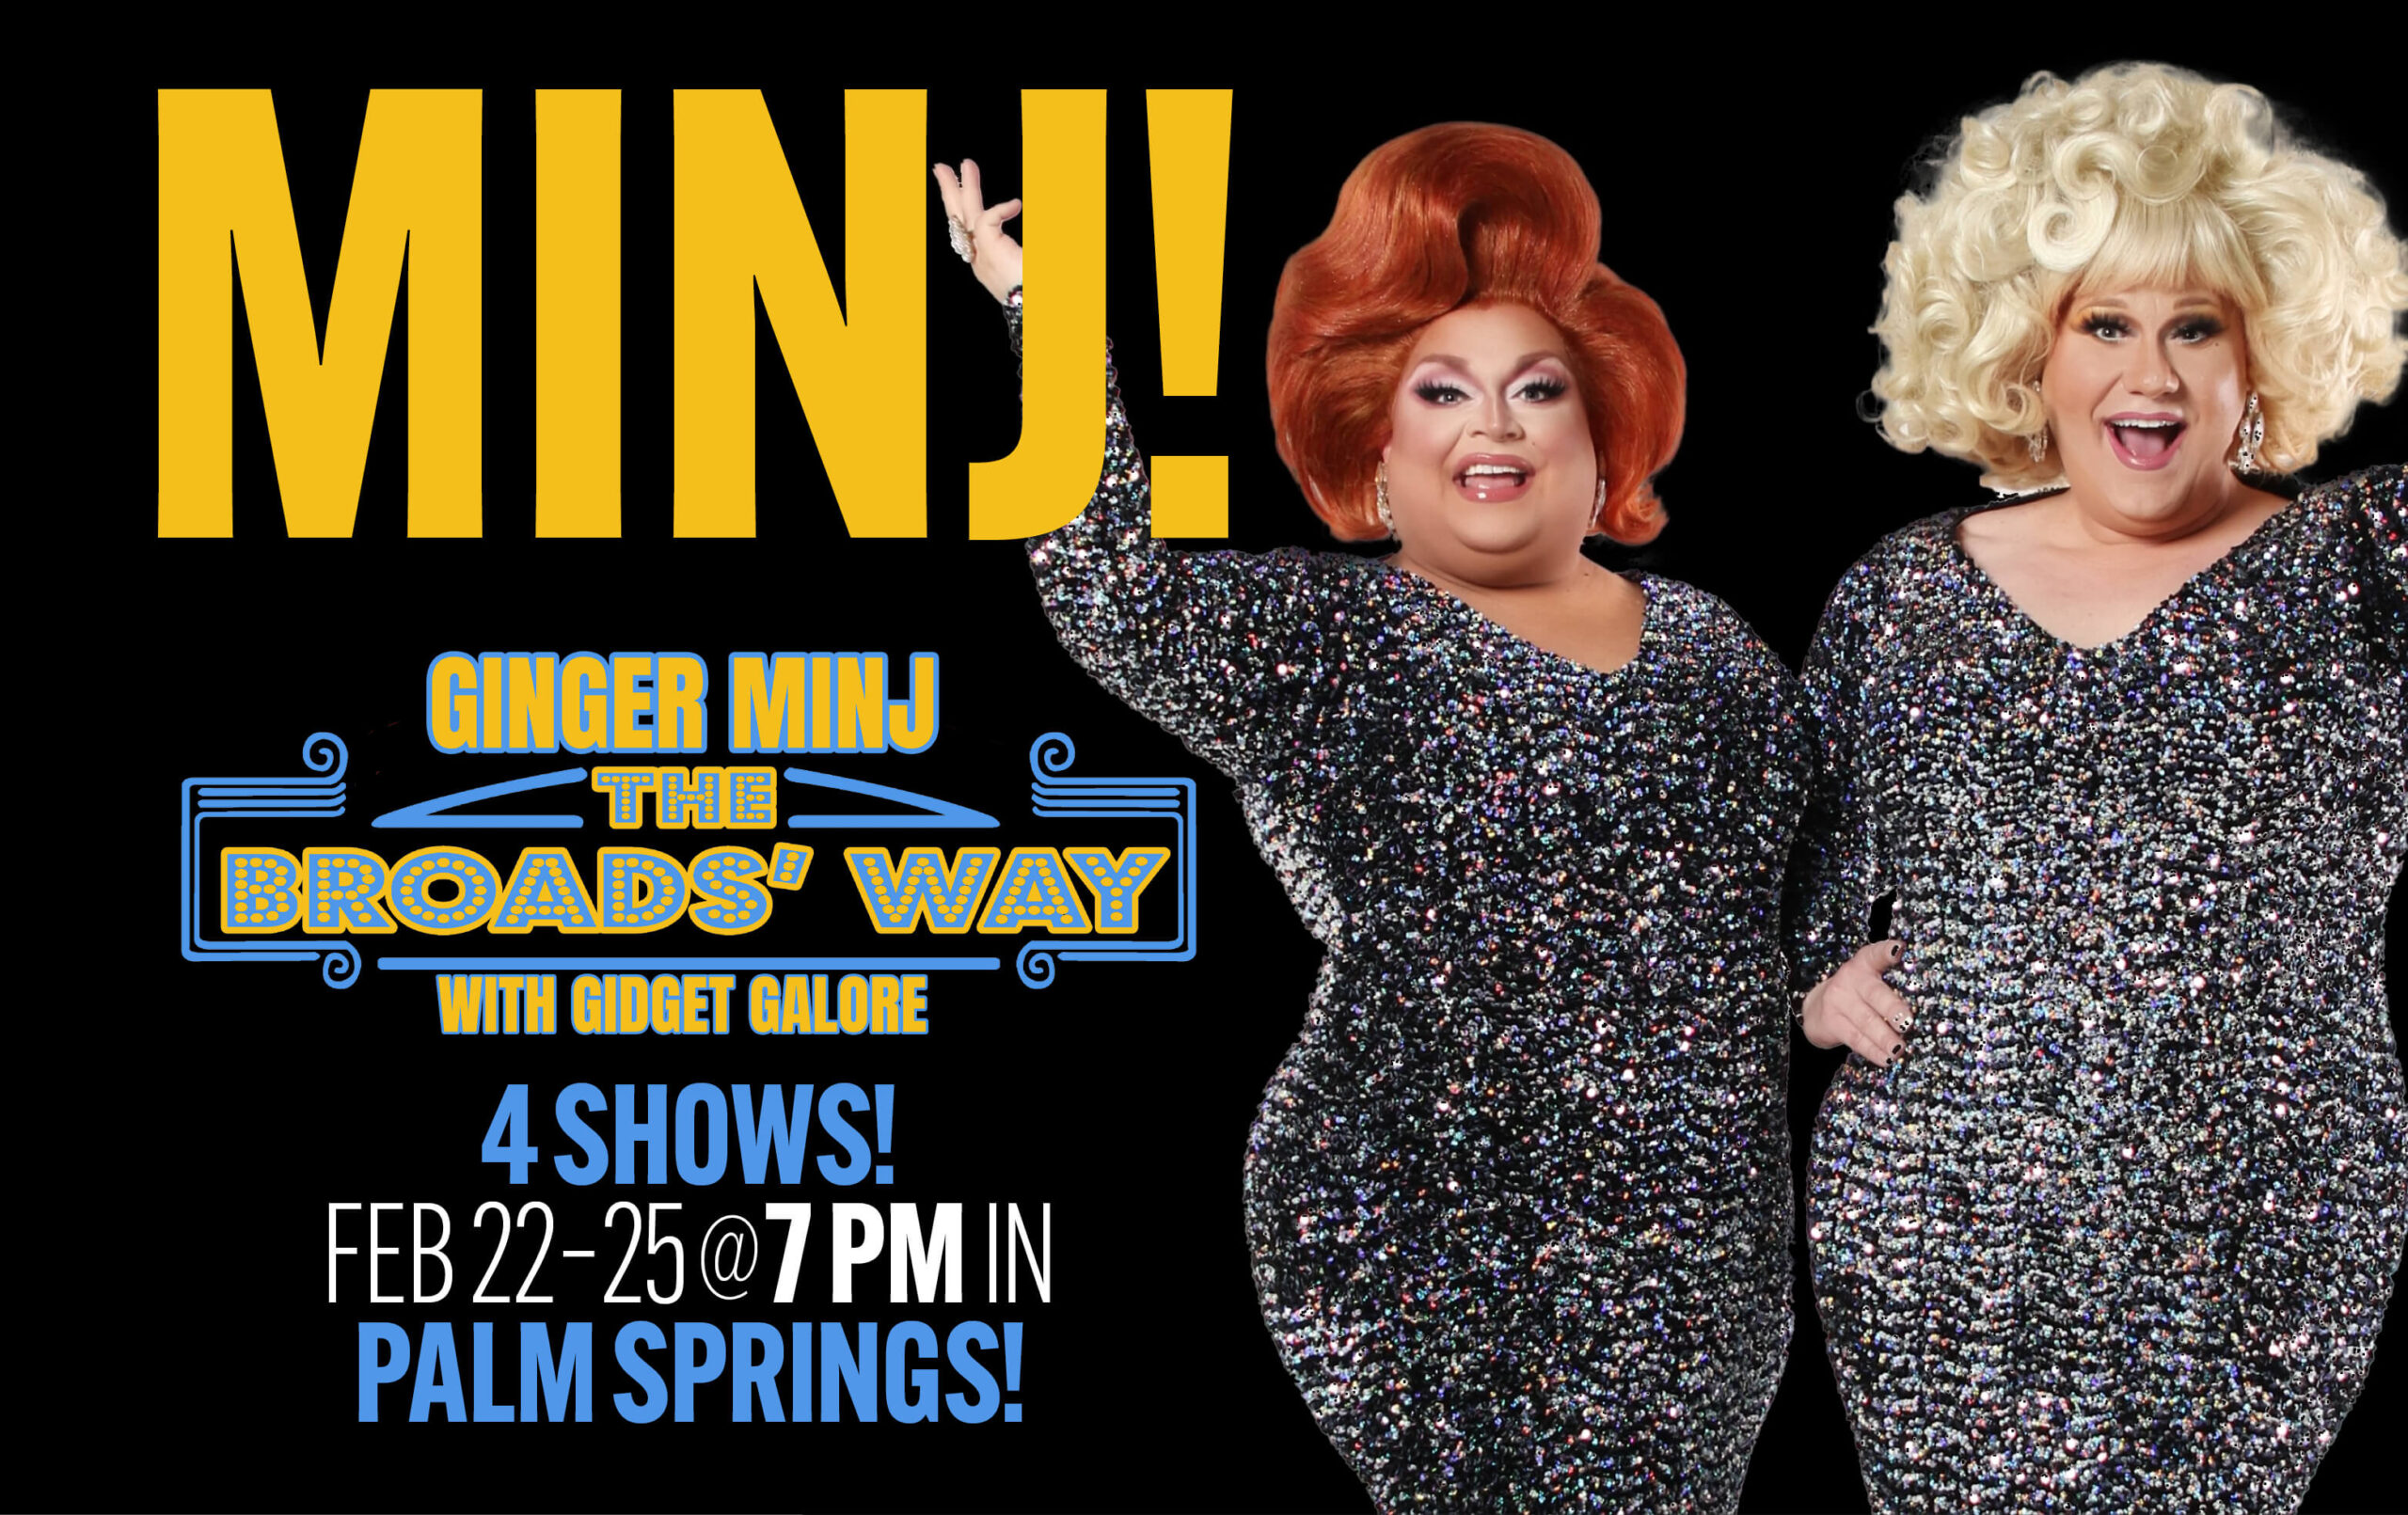 GINGER MINJ “THE BROADS’ WAY” with GIDGET GALORE at Fuego Event Space Palm Springs, presented by Pilgrim House, Provincetown